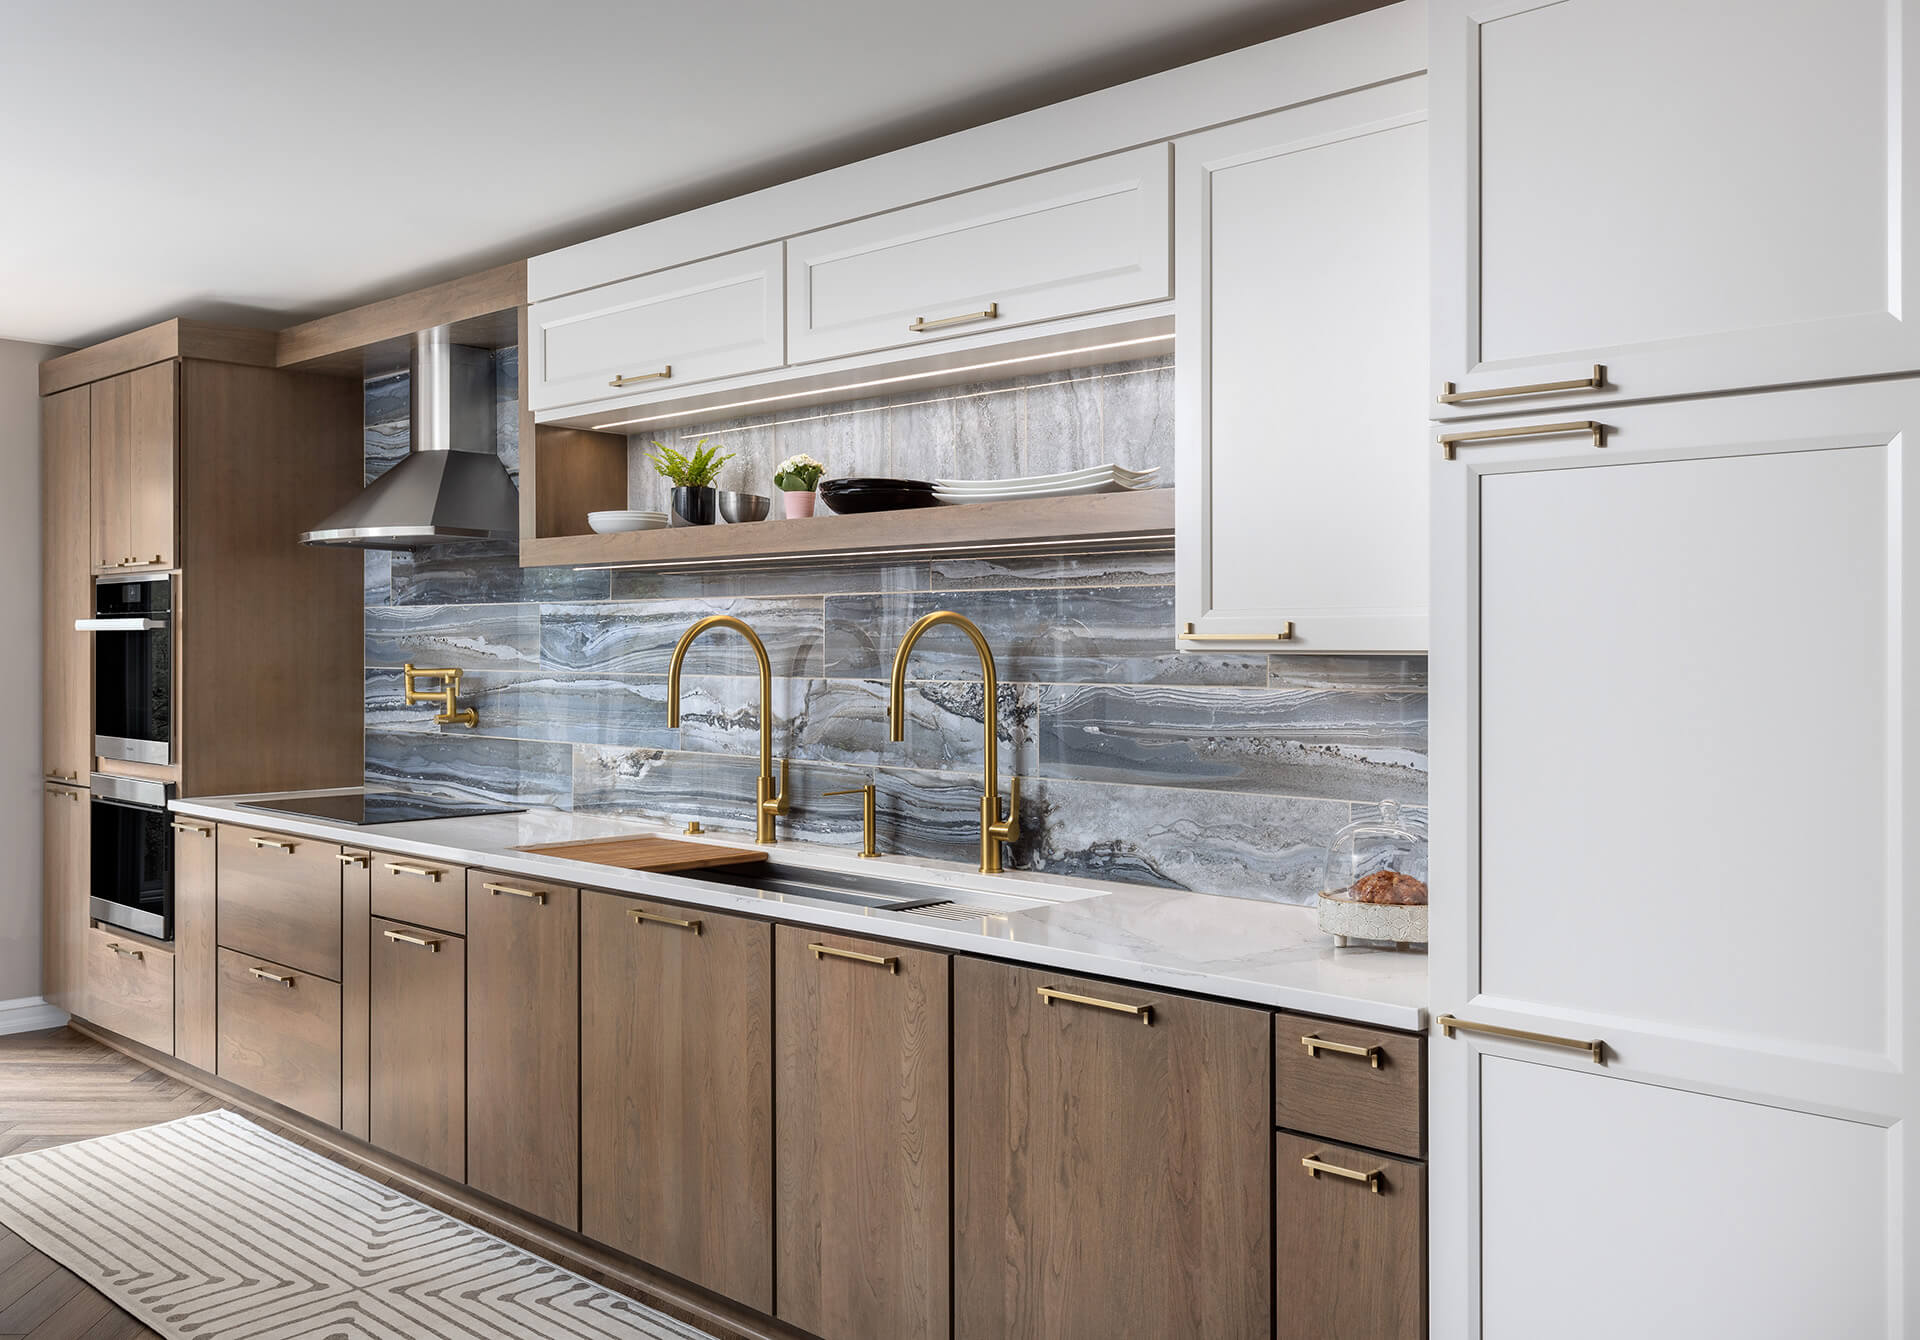 The color combo in this two-toned kitchen features a true brown stain and a tonal white painted finish which is right on-trend.